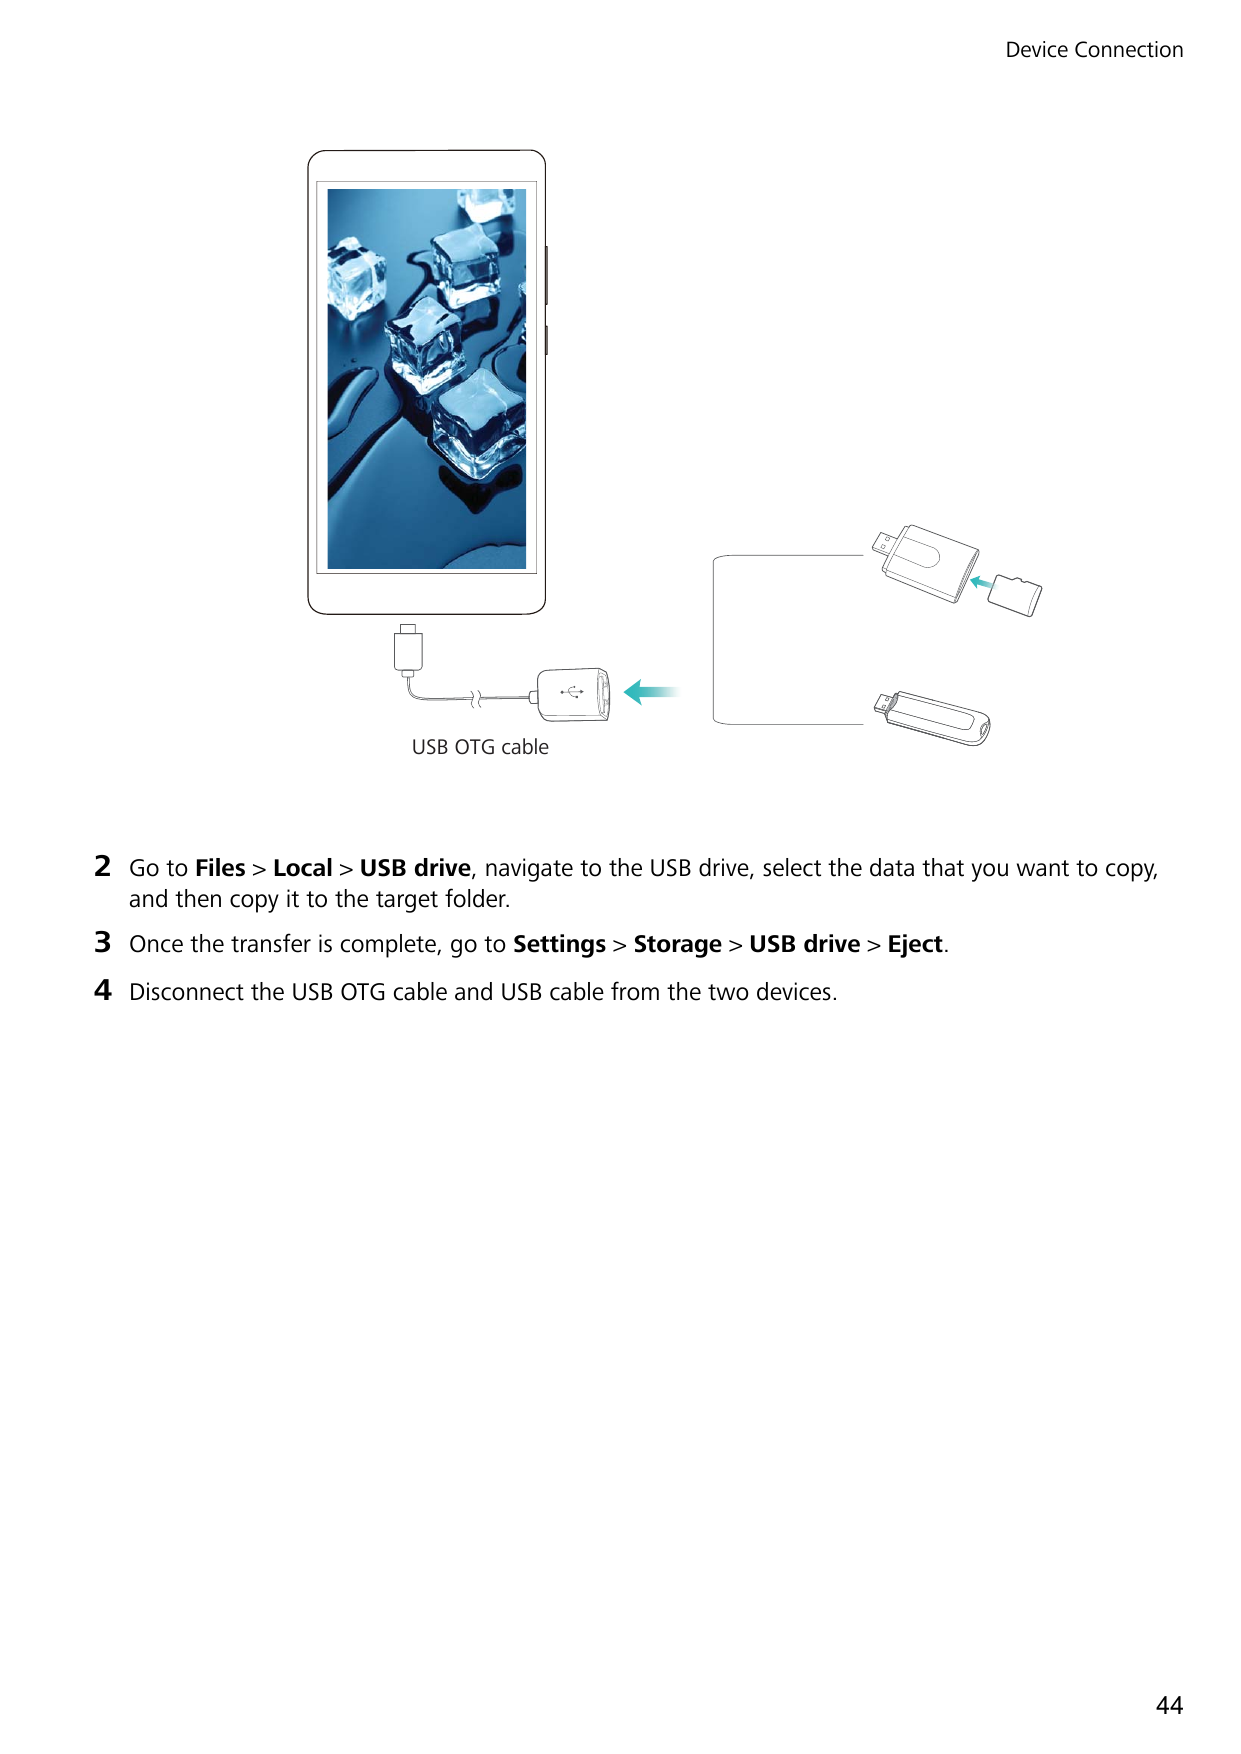 Device ConnectionUSB OTG cable2Go to Files > Local > USB drive, navigate to the USB drive, select the data that you want to copy